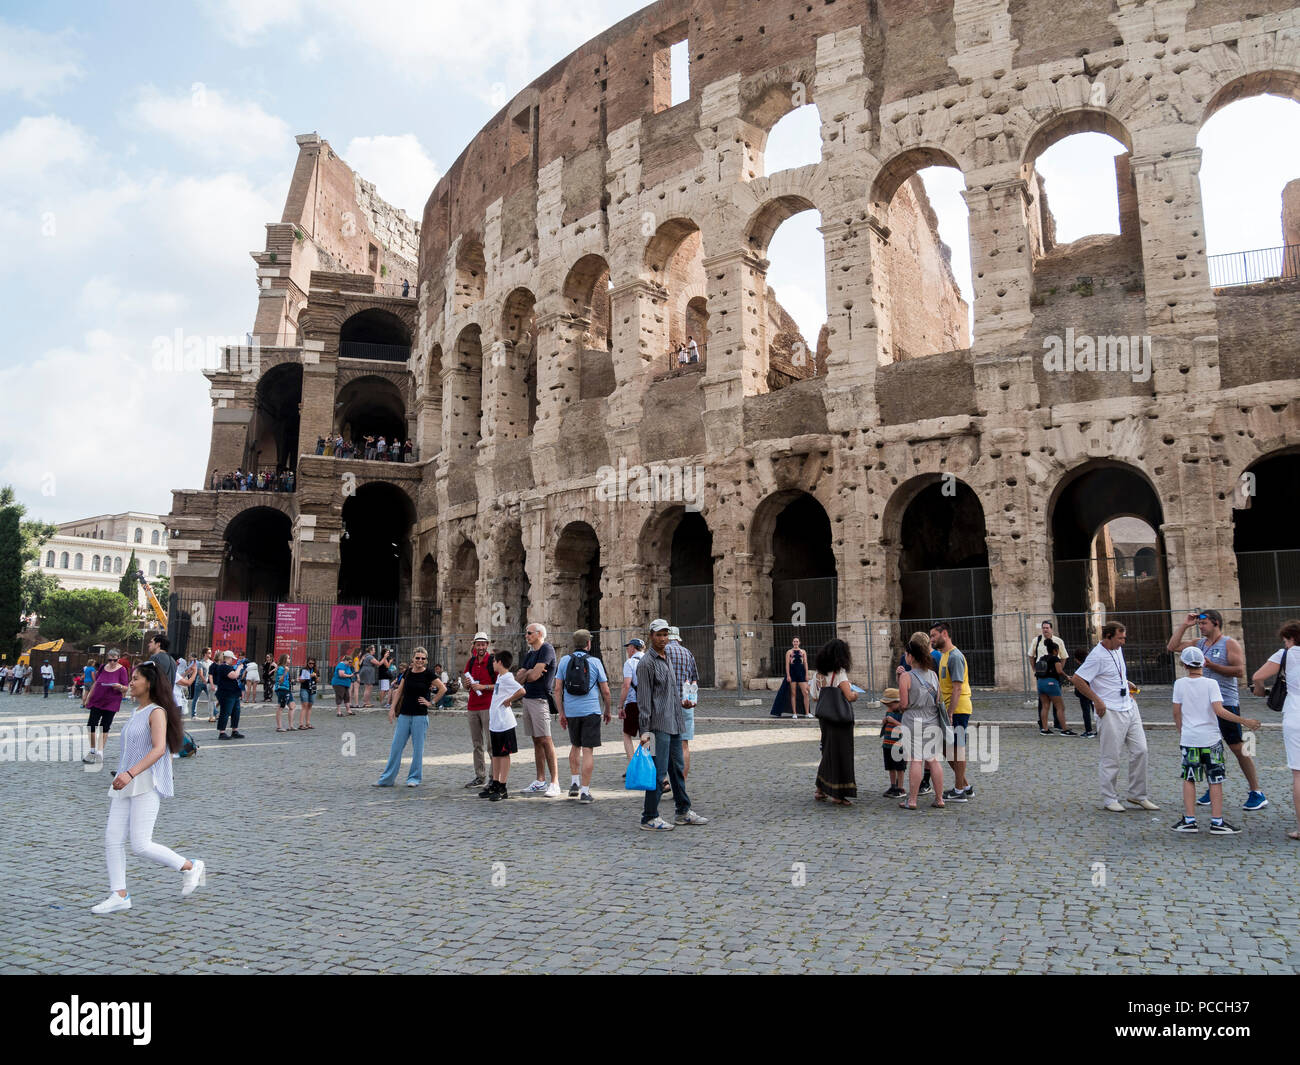 People walking around the walls of the Colosseum, Rome, Italy Stock Photo